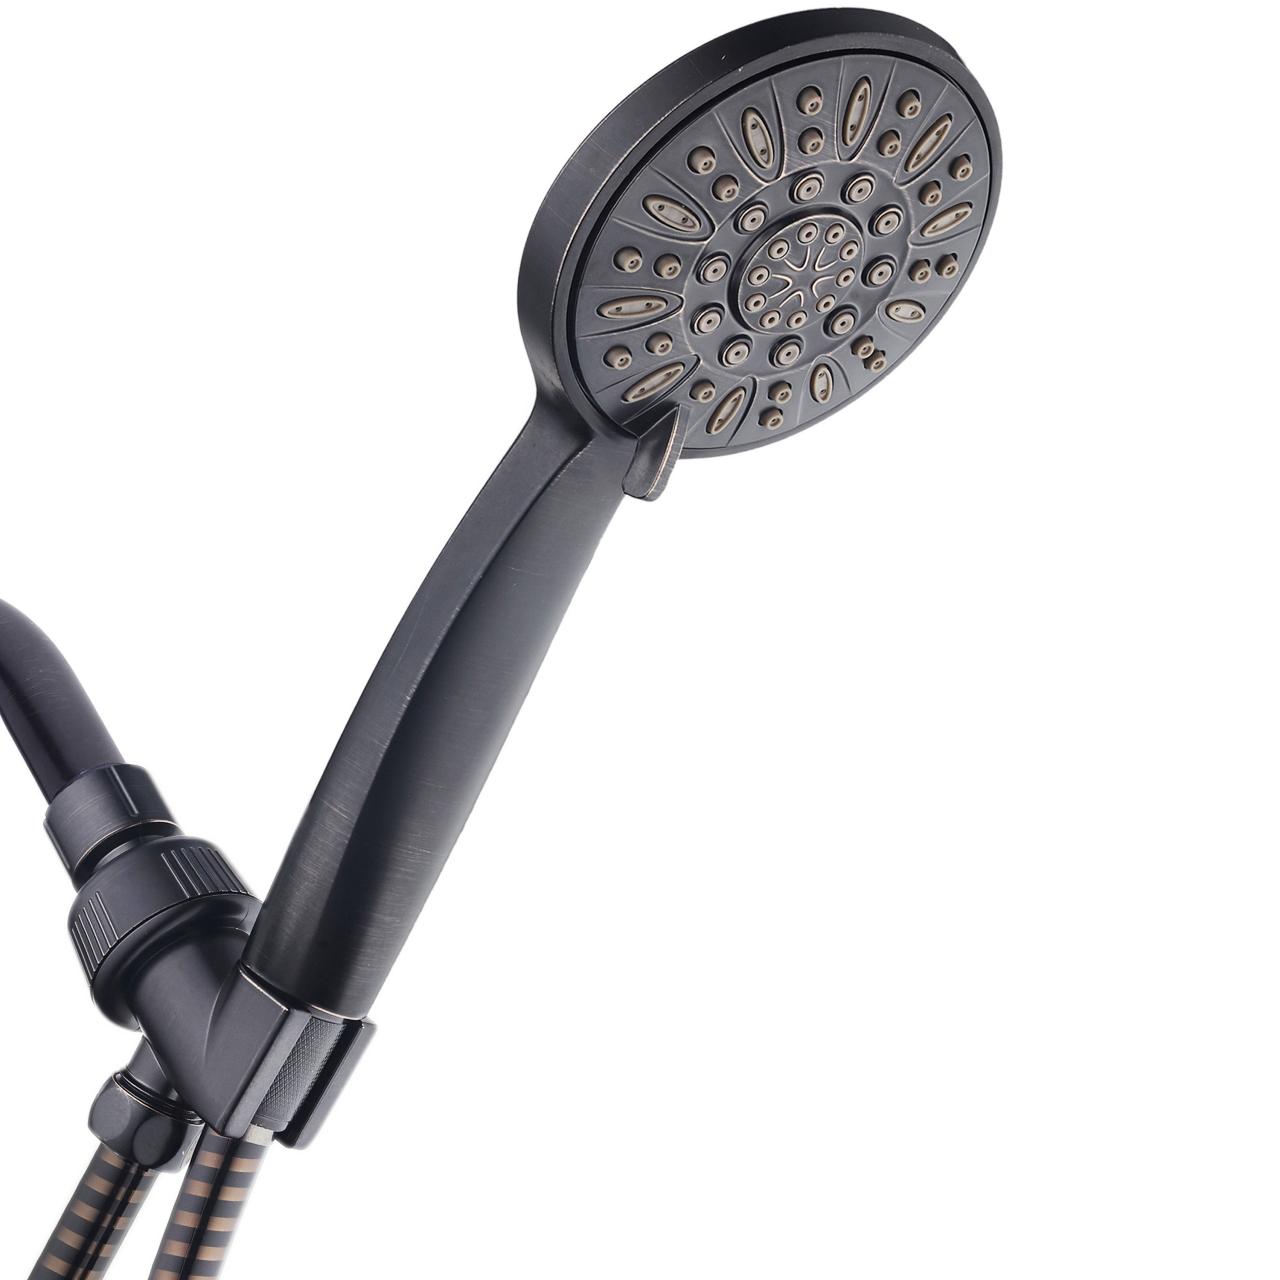 Buy Online Handheld Shower Head High Pressure 5 Function Adjustable Bath  Shower Jets with On/Off Pause Switch Removable Filter with Hose ▻ Alitools